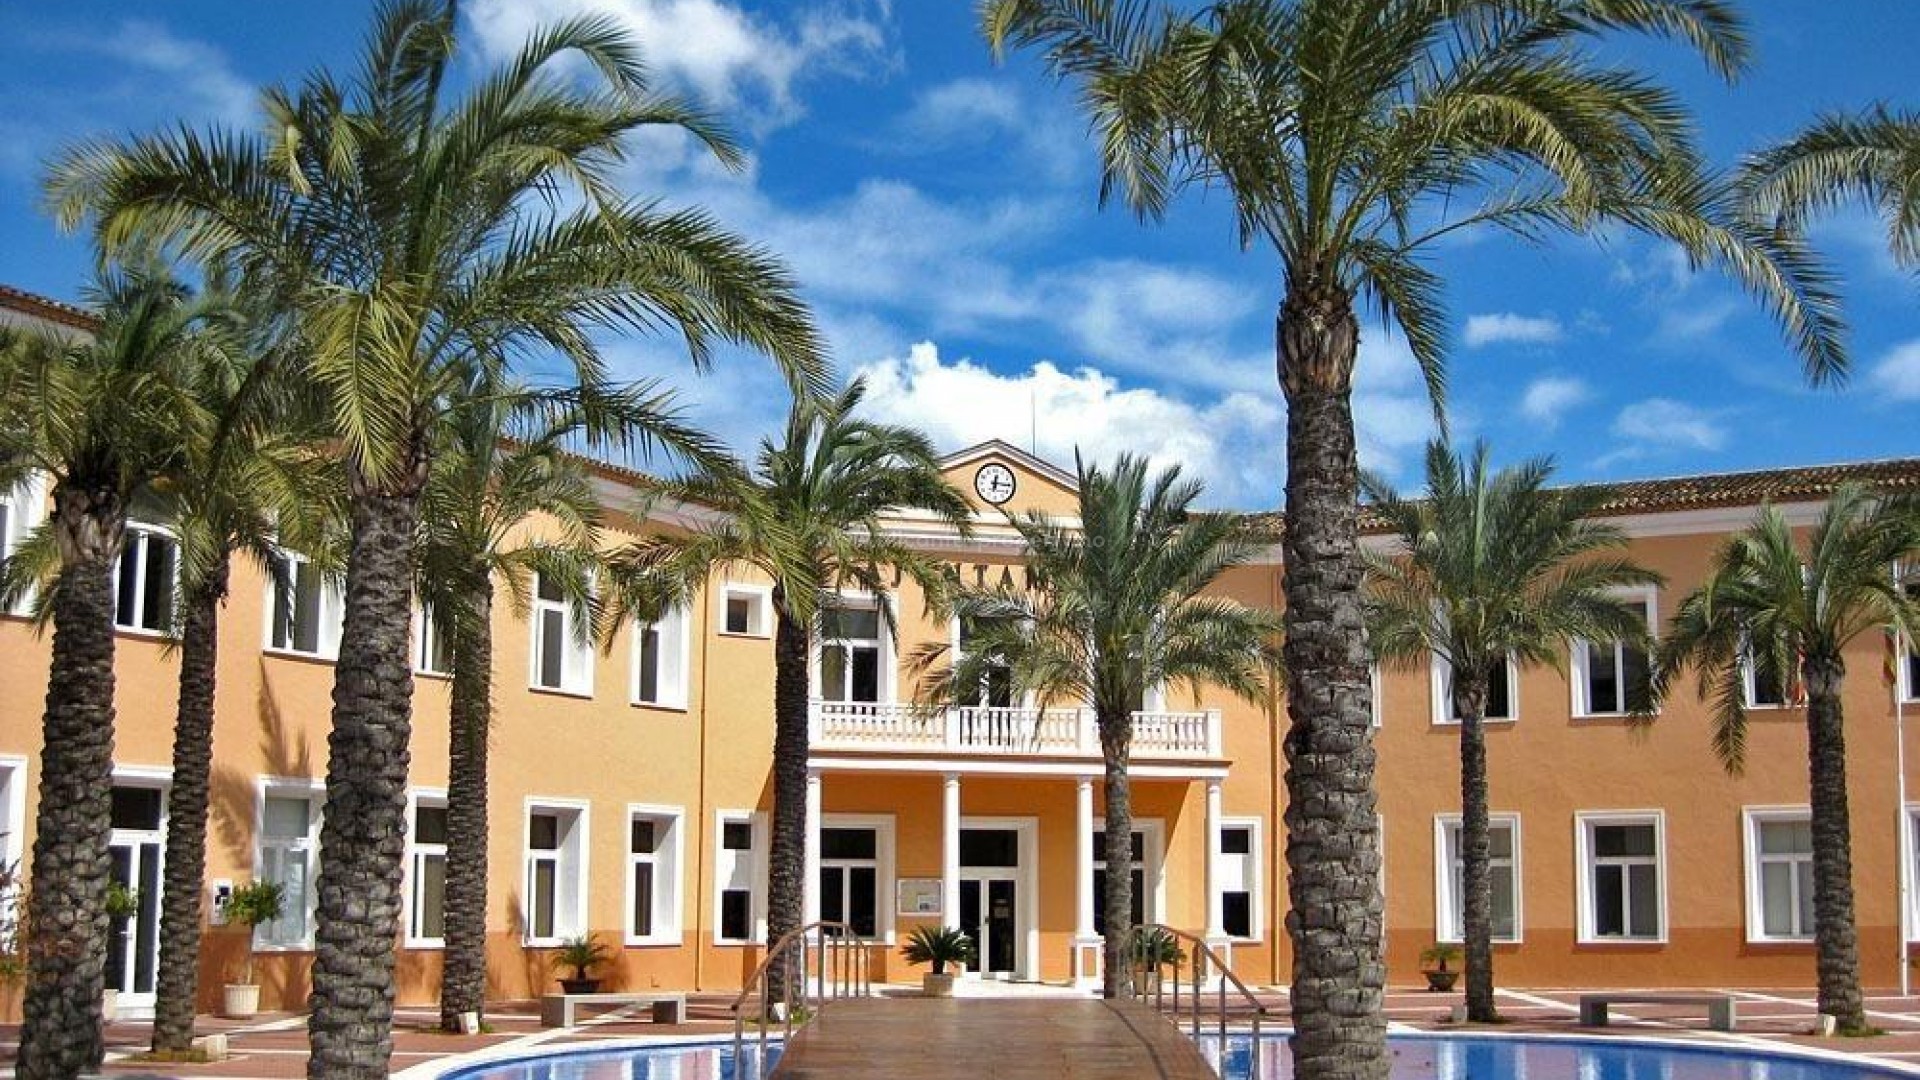 Exclusive new homes apartments/townhouses in El Vergel near Denia, 2/3 bedrooms, 2 bathrooms, each home has its own private areas, both indoor and outdoor